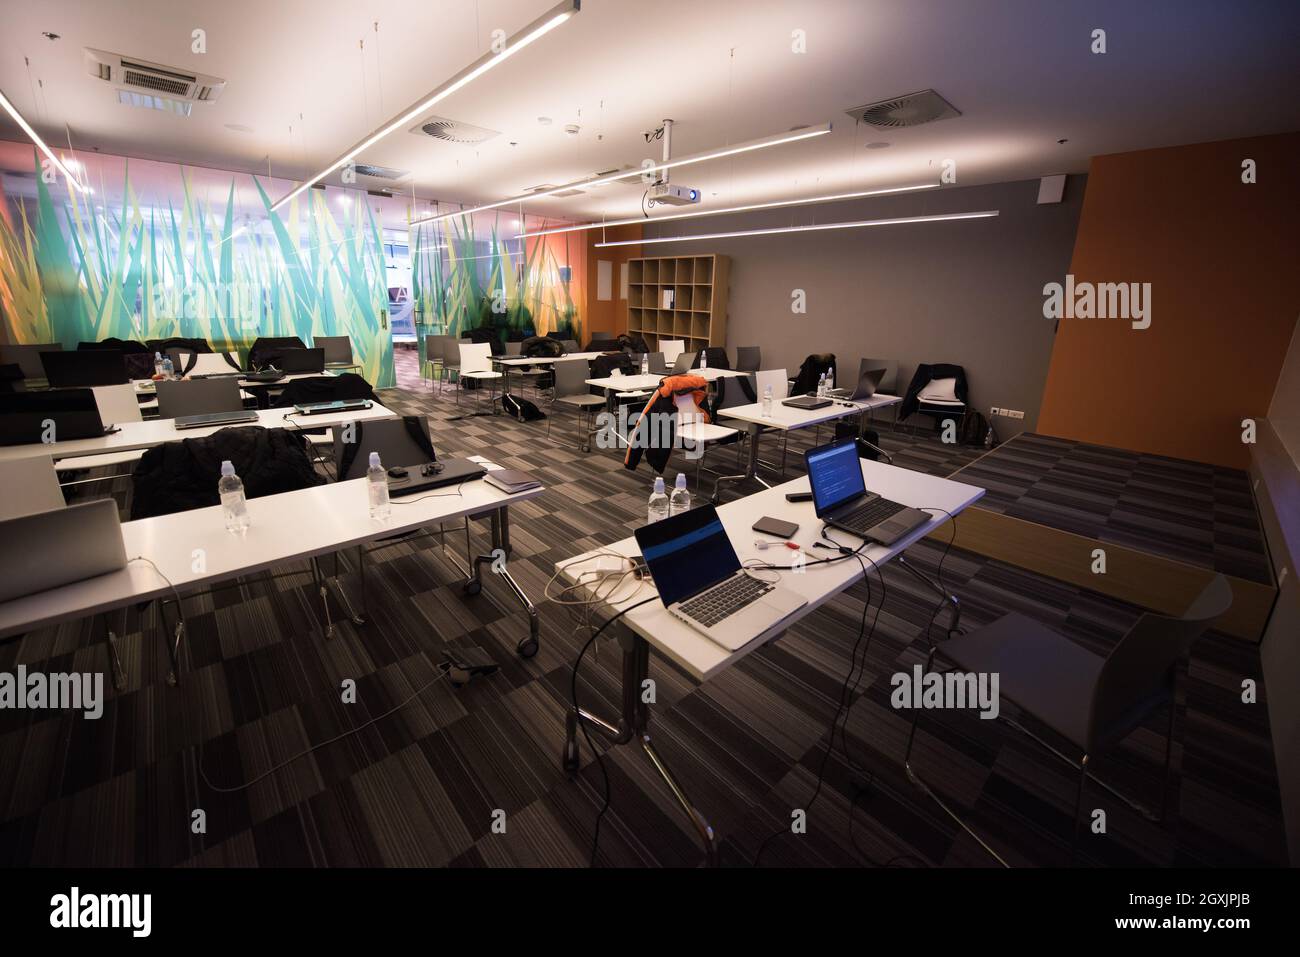 empty it classroom with program code on projector screen and modern laptop computers on table Stock Photo